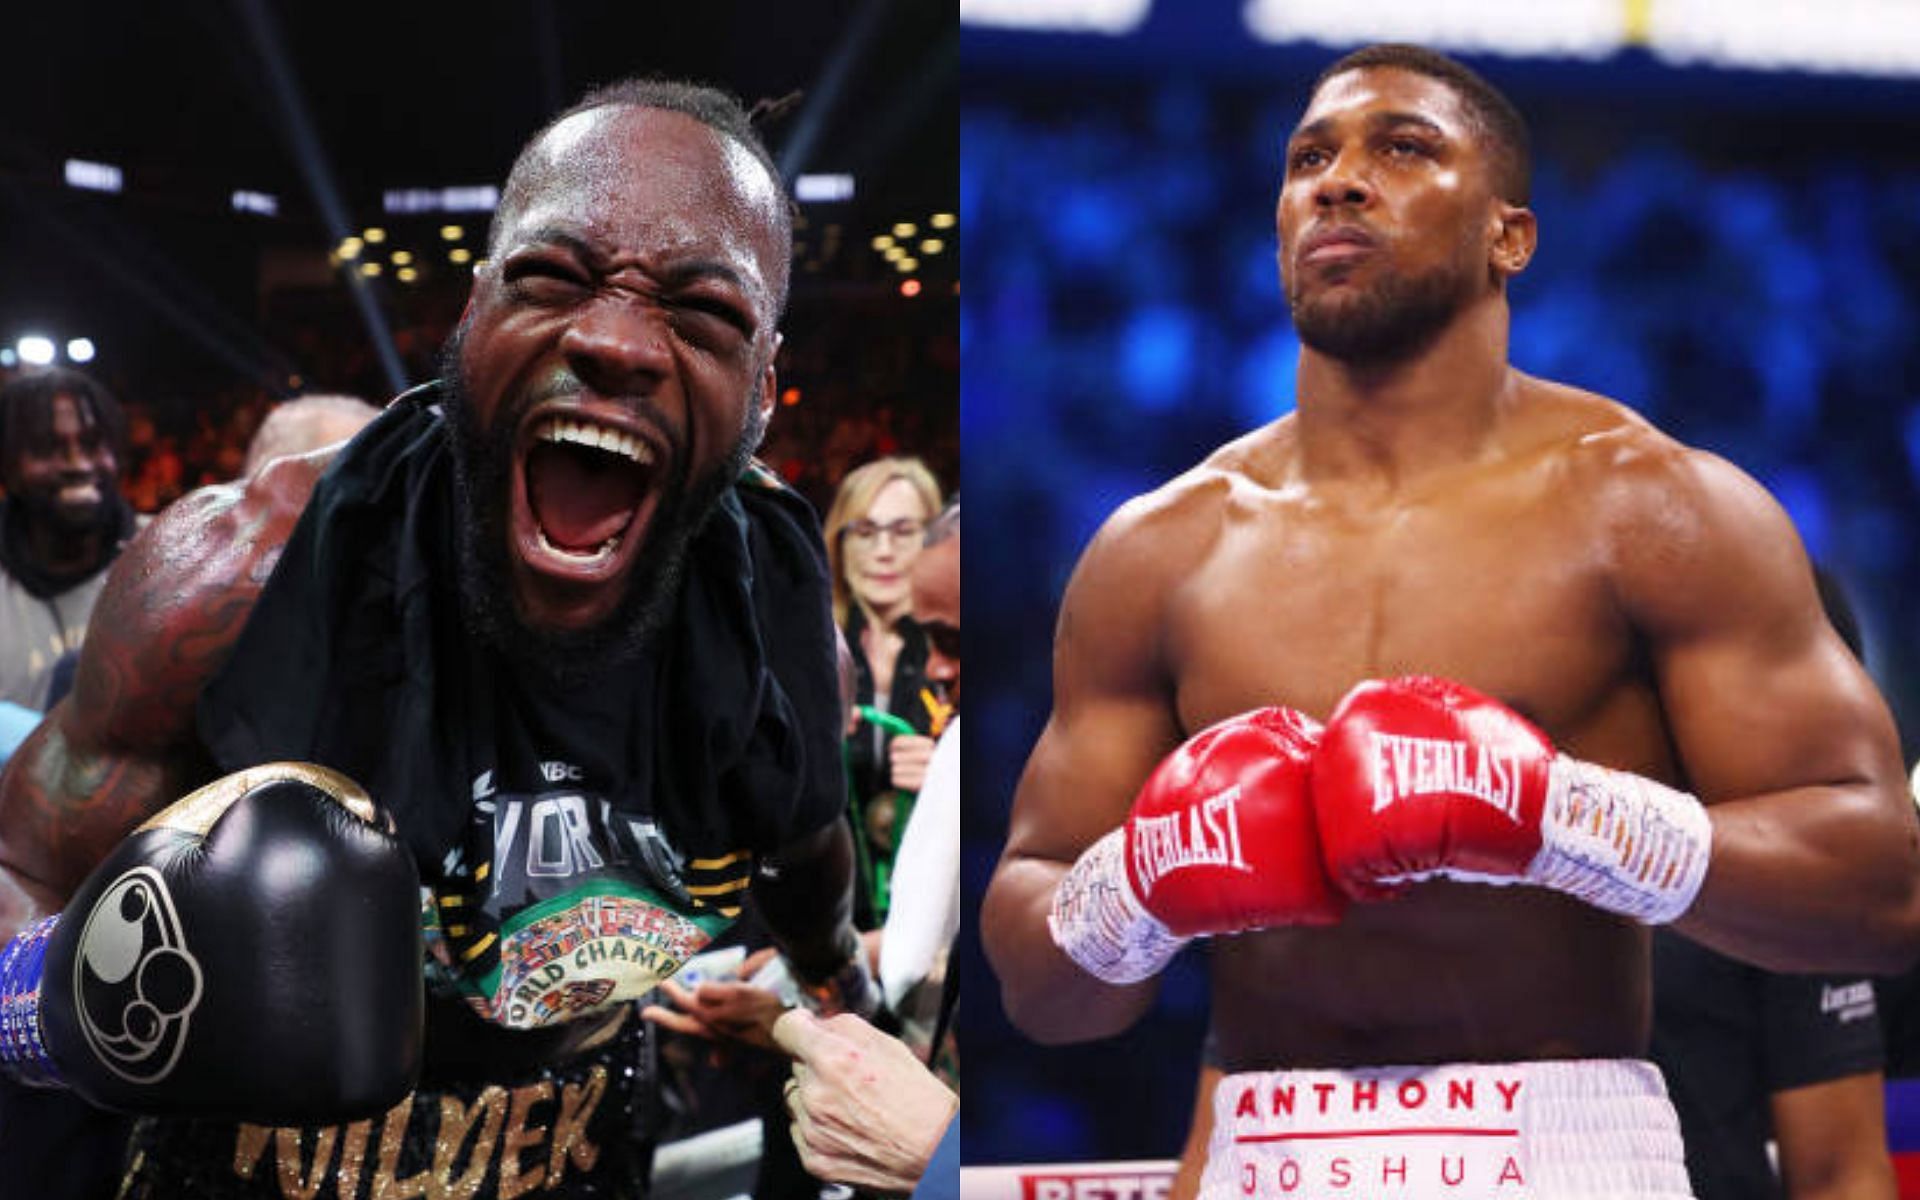 Deontay Wilder (left) and Anthony Joshua (right) [Images Courtesy: @GettyImages]